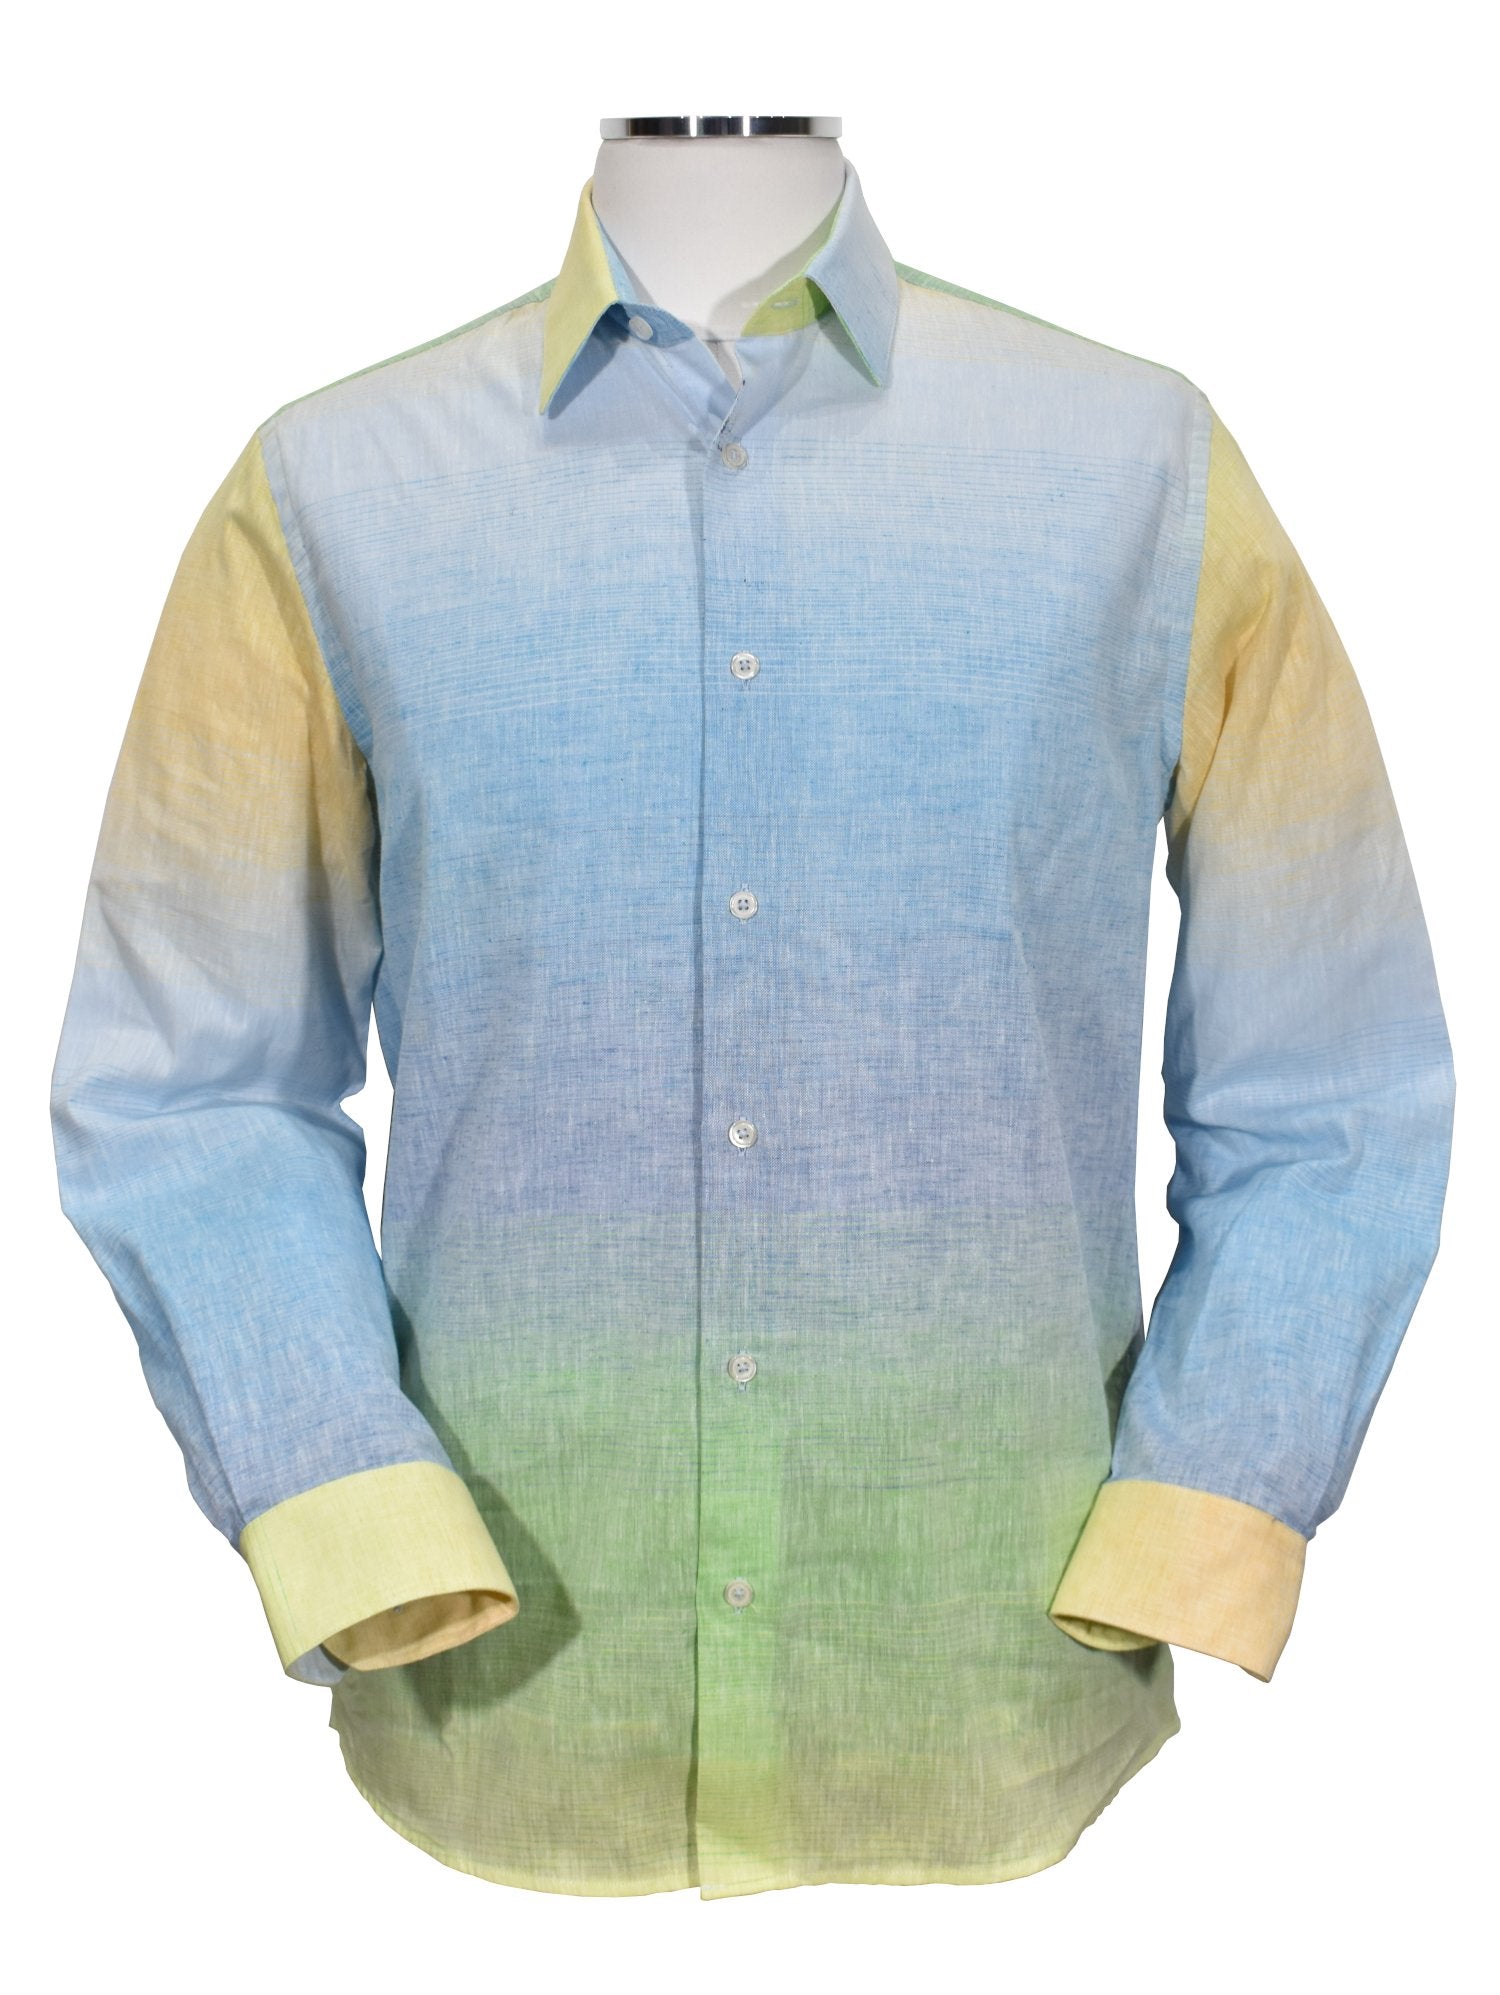 This light Spring Atlantic linen shirt is the perfect way to add a unique touch to any wardrobe! Its hombre effect mixes cool colors that you can easily style with any outfit. Keep cool and look great in ZA11068 Atlantic Linen Shade! by Marcello Sport